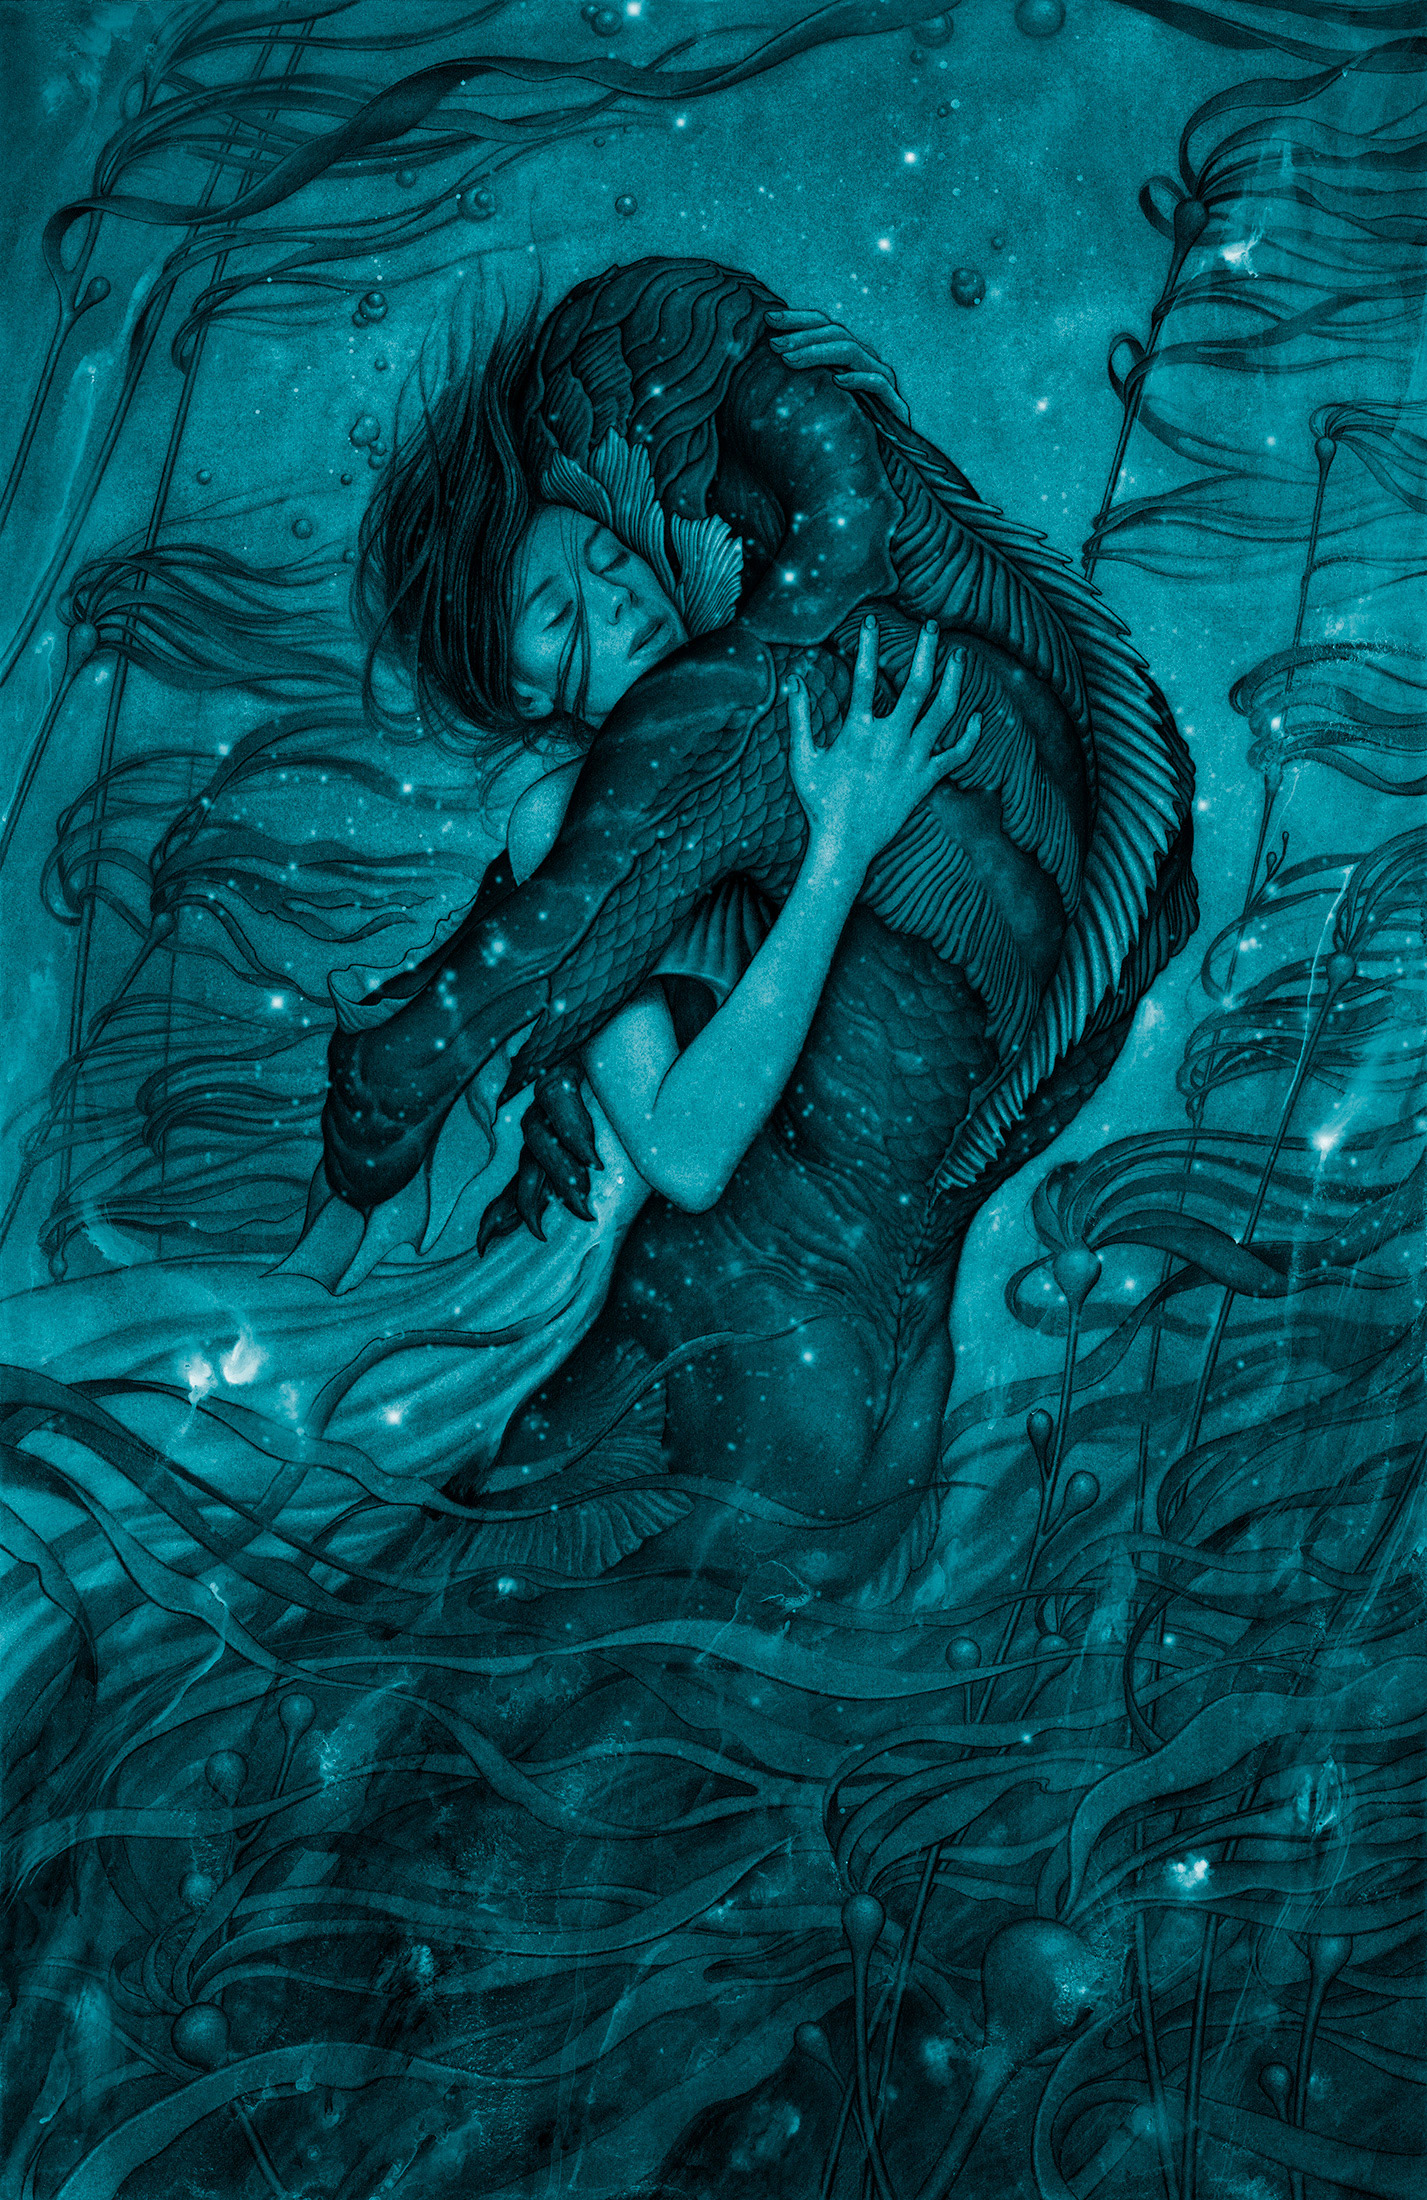 James Jean's finished poster for "The Shape of Water"